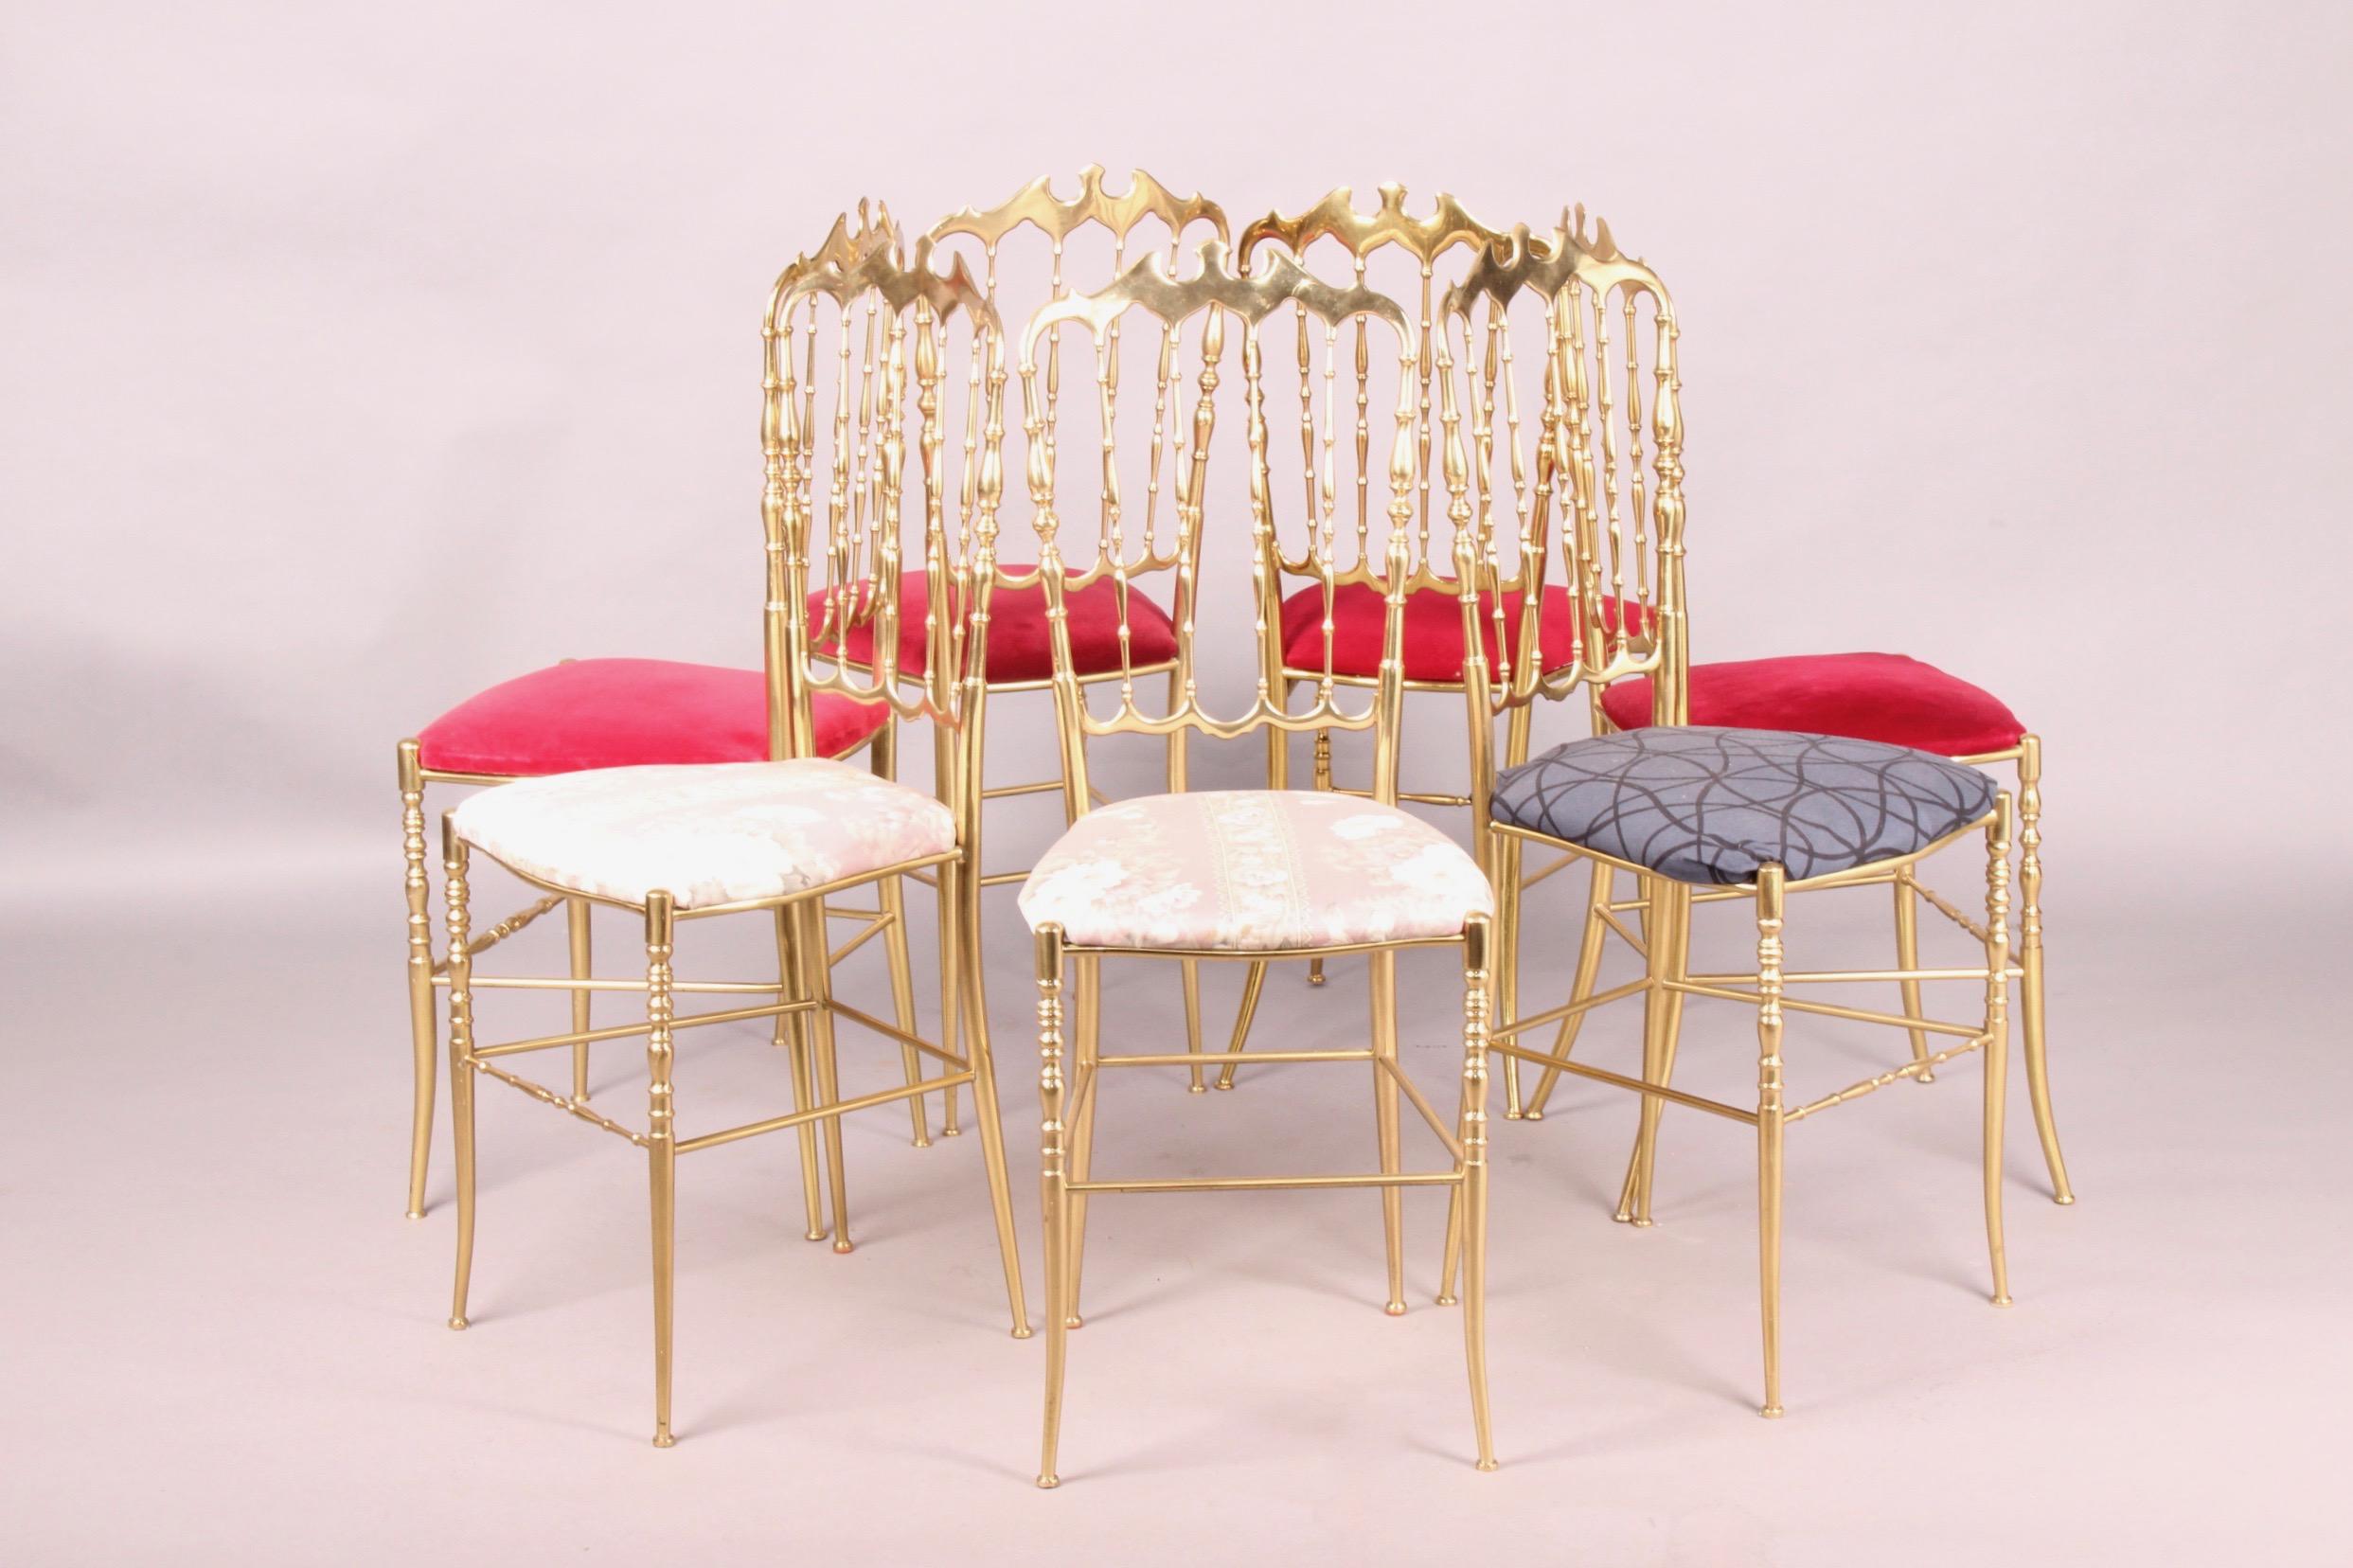 Set of 7 Chiavari brass chairs, little difference on all chairs.